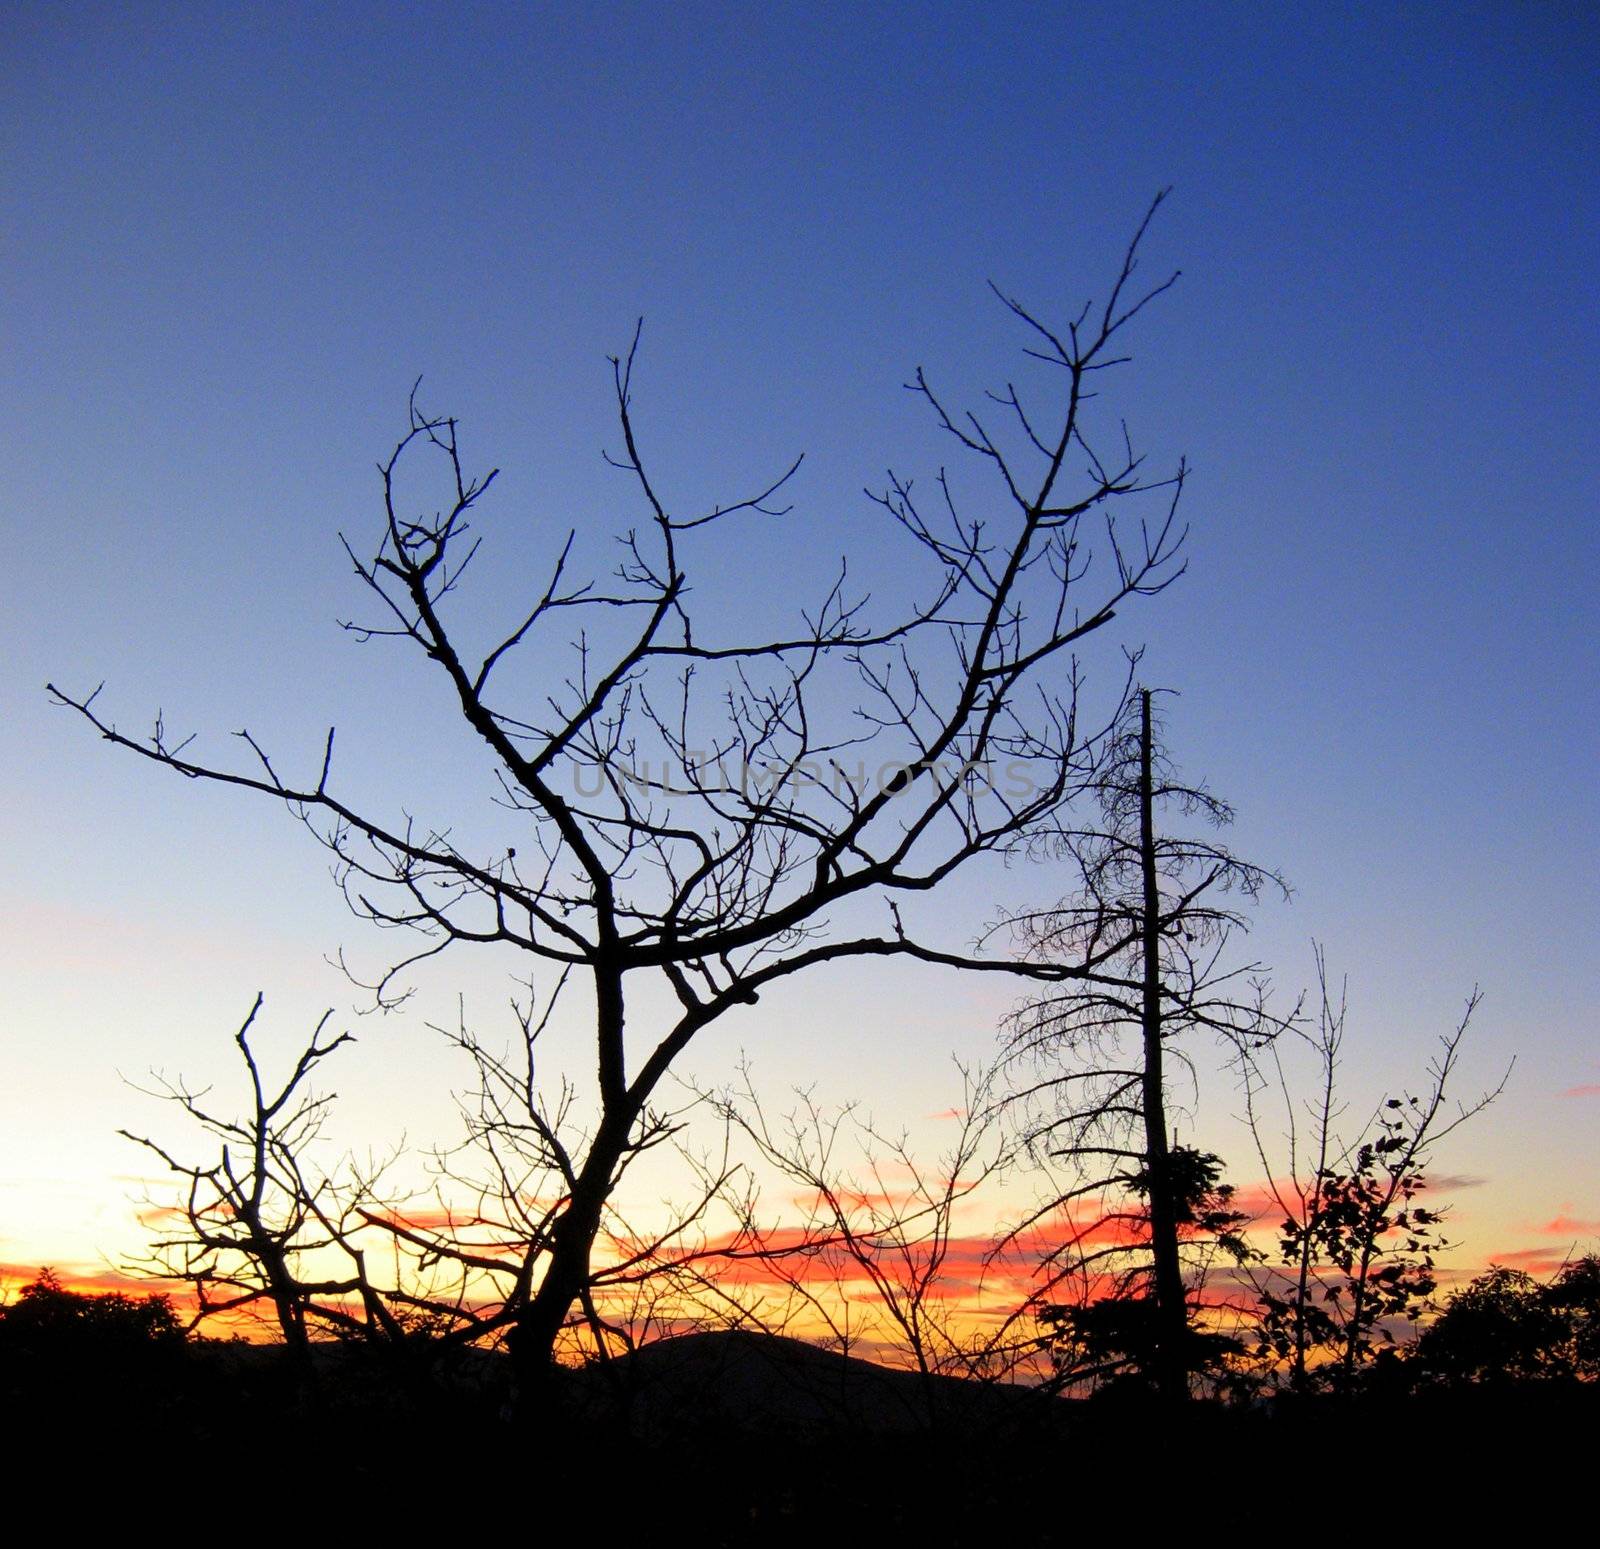 Crooked Tree, Straight Tree at Sunset by loongirl